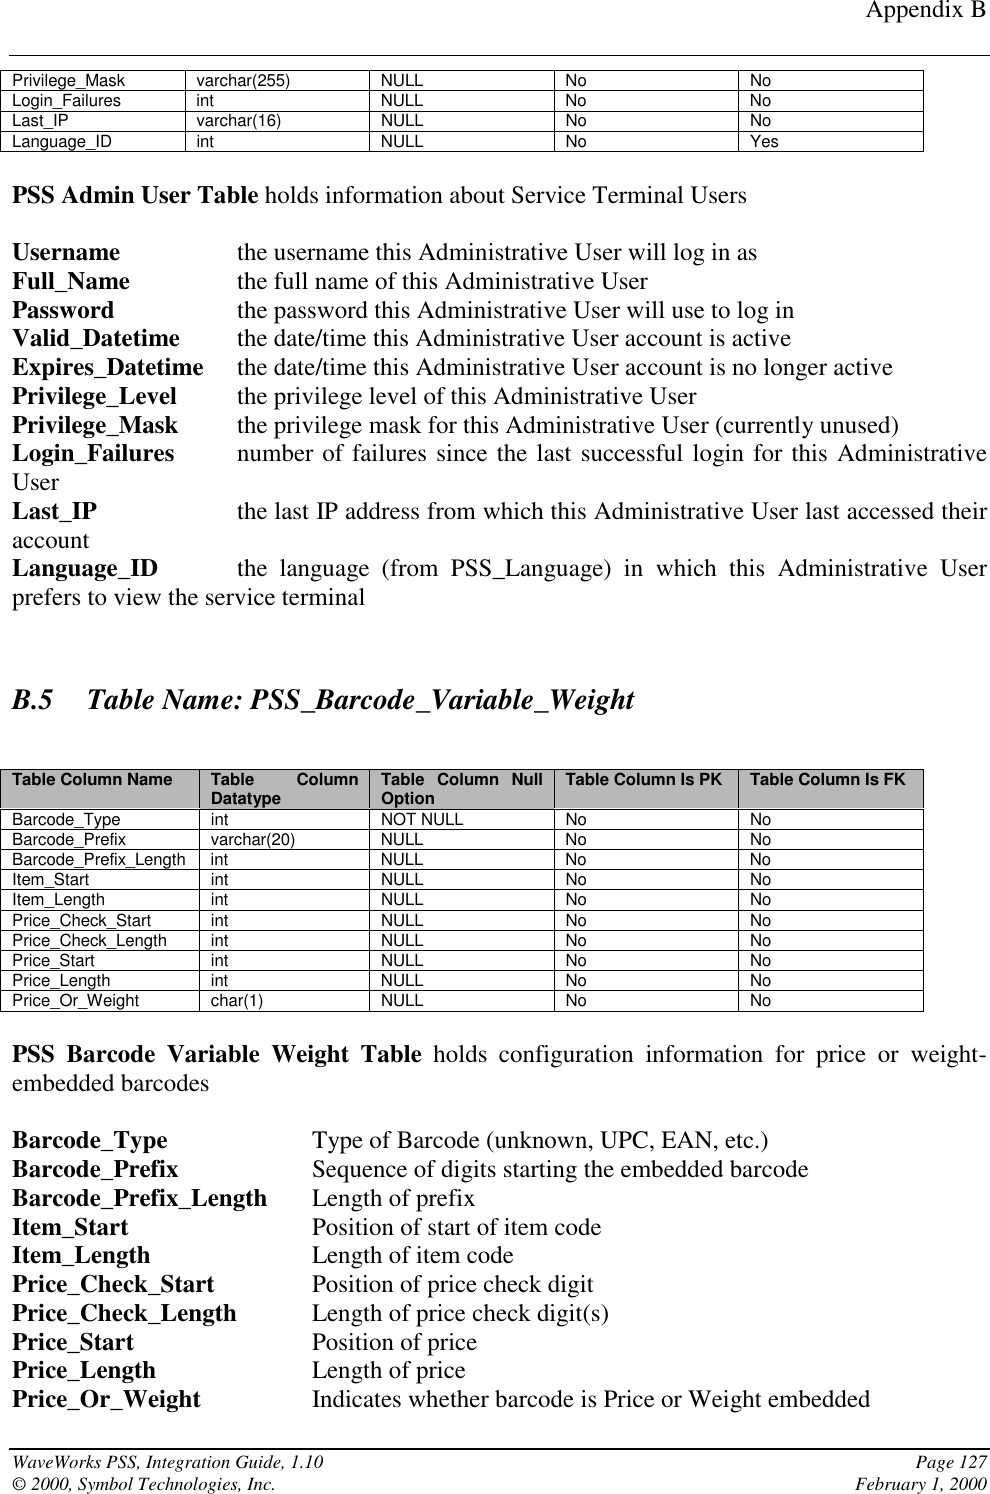 Appendix BWaveWorks PSS, Integration Guide, 1.10 Page 127© 2000, Symbol Technologies, Inc. February 1, 2000Privilege_Mask varchar(255) NULL No NoLogin_Failures int NULL No NoLast_IP varchar(16) NULL No NoLanguage_ID int NULL No YesPSS Admin User Table holds information about Service Terminal UsersUsername the username this Administrative User will log in asFull_Name the full name of this Administrative UserPassword the password this Administrative User will use to log inValid_Datetime the date/time this Administrative User account is activeExpires_Datetime the date/time this Administrative User account is no longer activePrivilege_Level the privilege level of this Administrative UserPrivilege_Mask the privilege mask for this Administrative User (currently unused)Login_Failures number of failures since the last successful login for this AdministrativeUserLast_IP the last IP address from which this Administrative User last accessed theiraccountLanguage_ID the language (from PSS_Language) in which this Administrative Userprefers to view the service terminalB.5 Table Name: PSS_Barcode_Variable_WeightTable Column Name Table ColumnDatatype Table Column NullOption Table Column Is PK Table Column Is FKBarcode_Type int NOT NULL No NoBarcode_Prefix varchar(20) NULL No NoBarcode_Prefix_Length int NULL No NoItem_Start int NULL No NoItem_Length int NULL No NoPrice_Check_Start int NULL No NoPrice_Check_Length int NULL No NoPrice_Start int NULL No NoPrice_Length int NULL No NoPrice_Or_Weight char(1) NULL No NoPSS Barcode Variable Weight Table holds configuration information for price or weight-embedded barcodesBarcode_Type Type of Barcode (unknown, UPC, EAN, etc.)Barcode_Prefix Sequence of digits starting the embedded barcodeBarcode_Prefix_Length Length of prefixItem_Start Position of start of item codeItem_Length Length of item codePrice_Check_Start Position of price check digitPrice_Check_Length Length of price check digit(s)Price_Start Position of pricePrice_Length Length of pricePrice_Or_Weight Indicates whether barcode is Price or Weight embedded